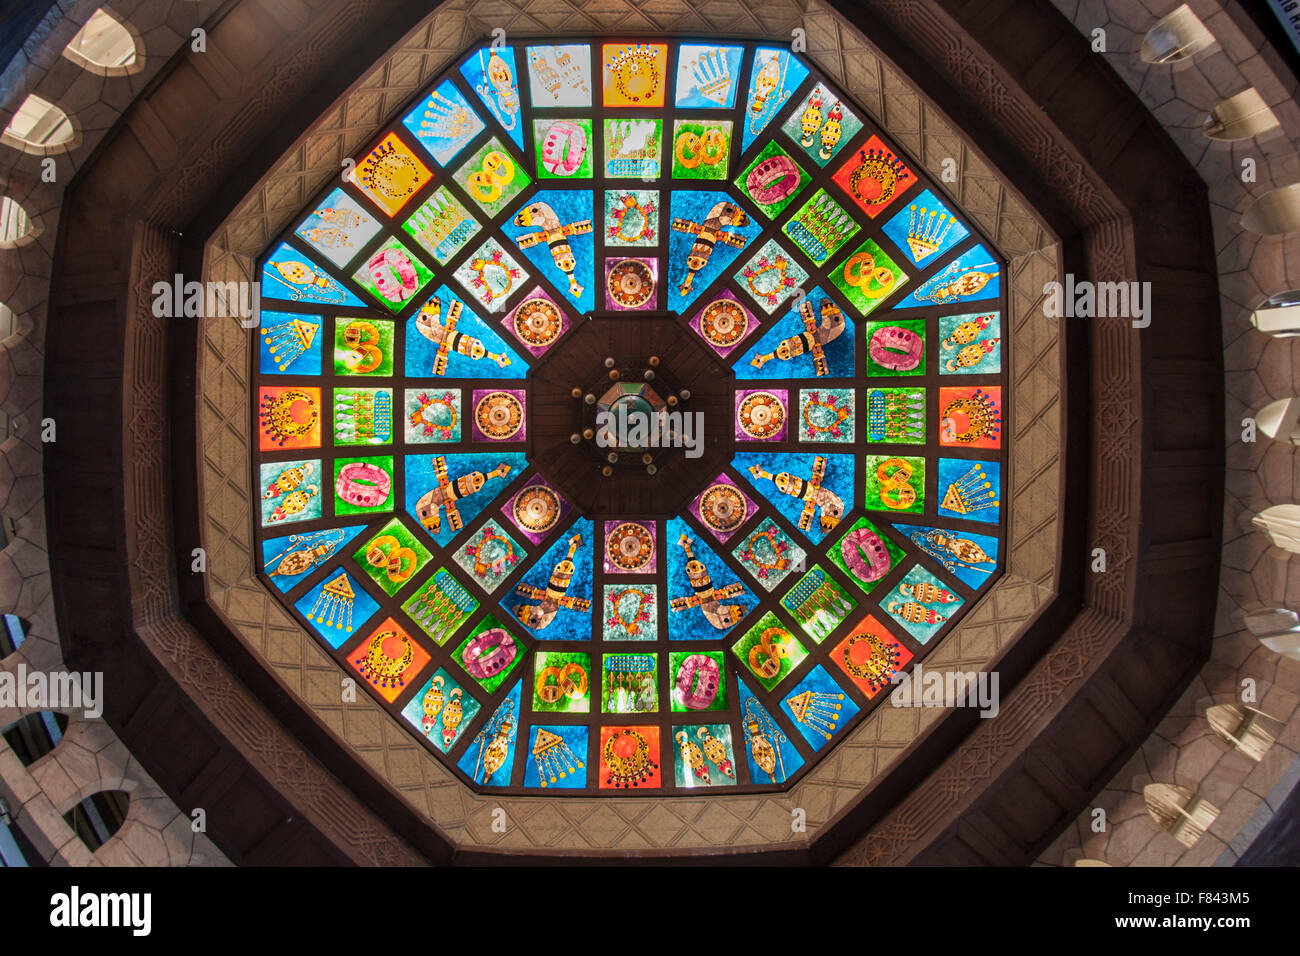 Decorative skylight in the Mutrah souk in Muscat, the capital of the Sultanate of Oman. Stock Photo